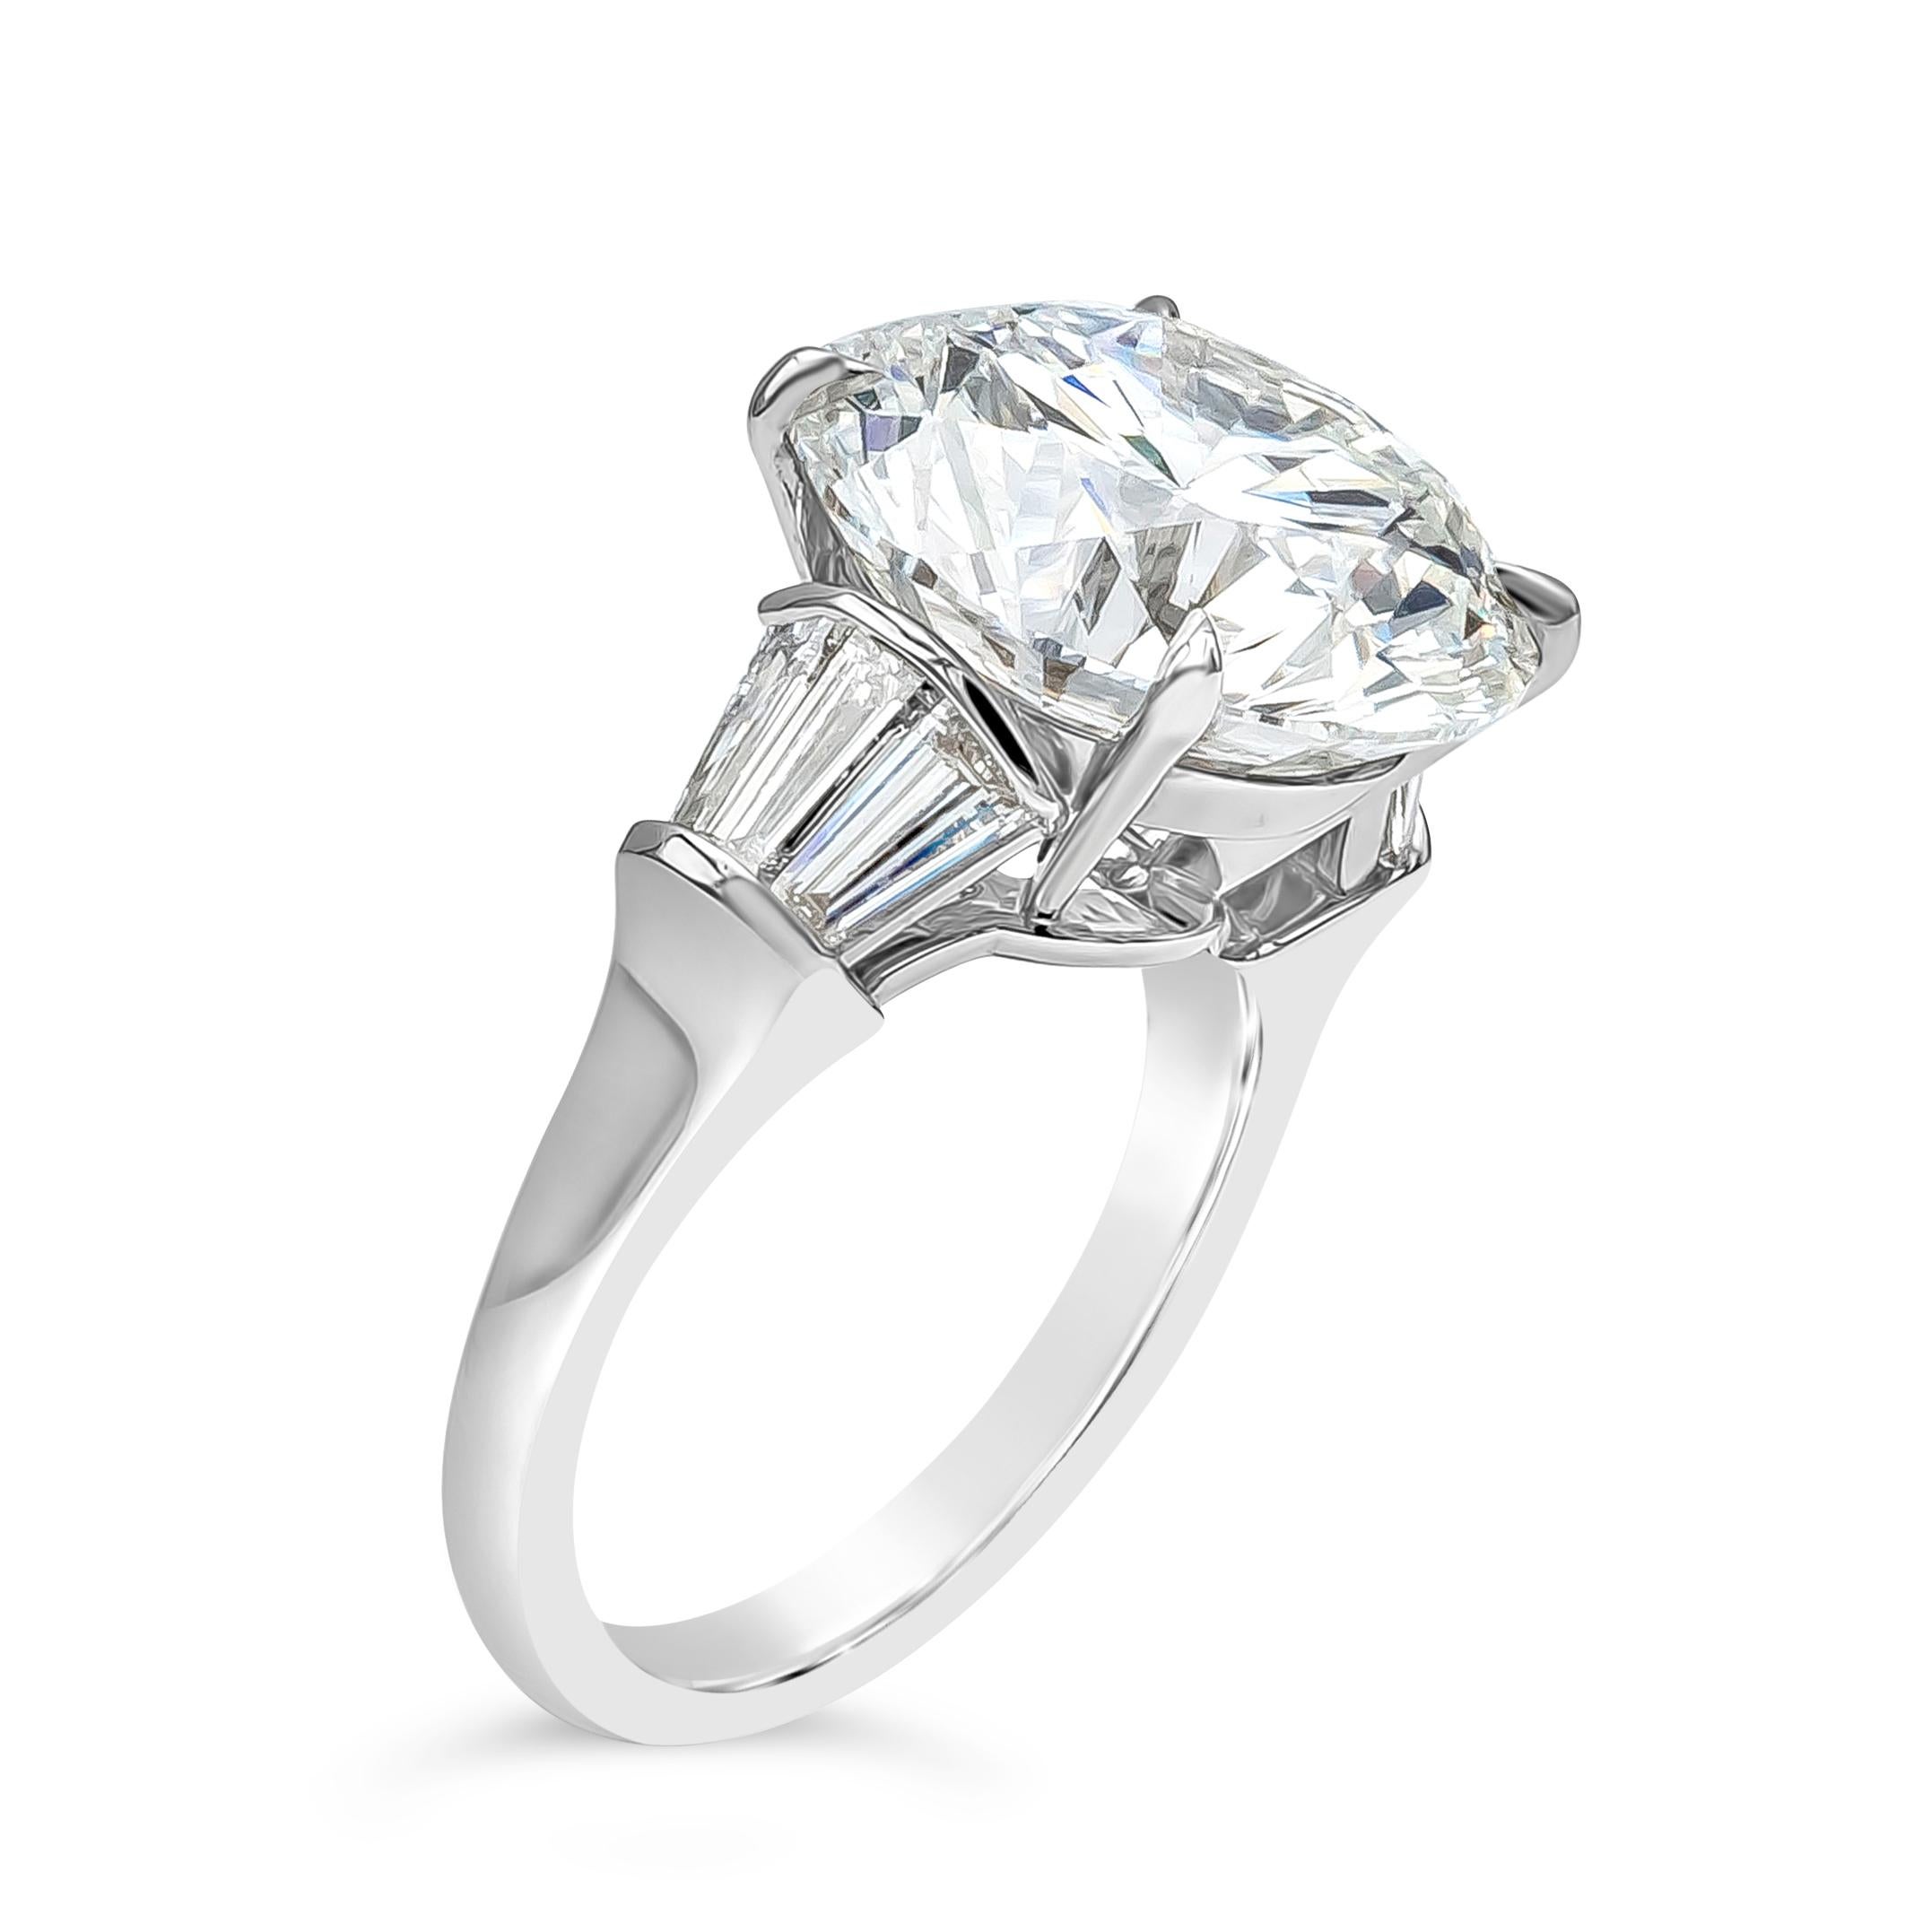 GIA Certified 12.03 Carat Brilliant Round Diamond Engagement Ring For Sale 1